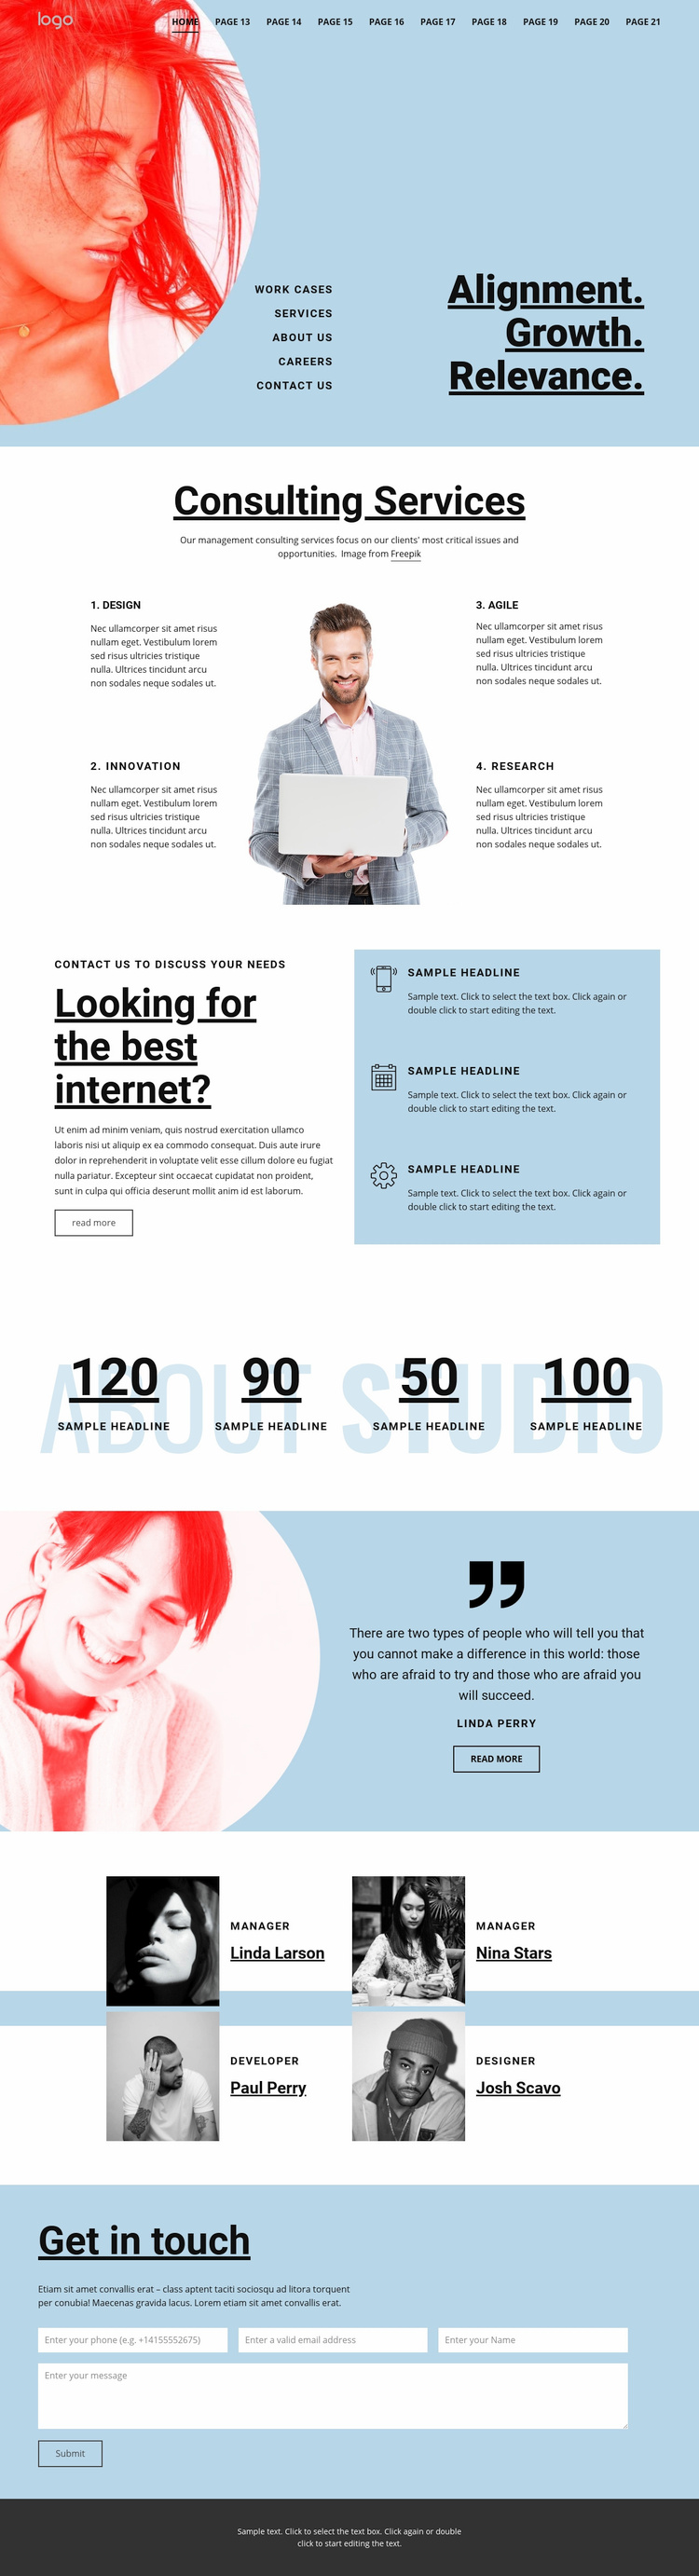 Consulting business services Wix Template Alternative